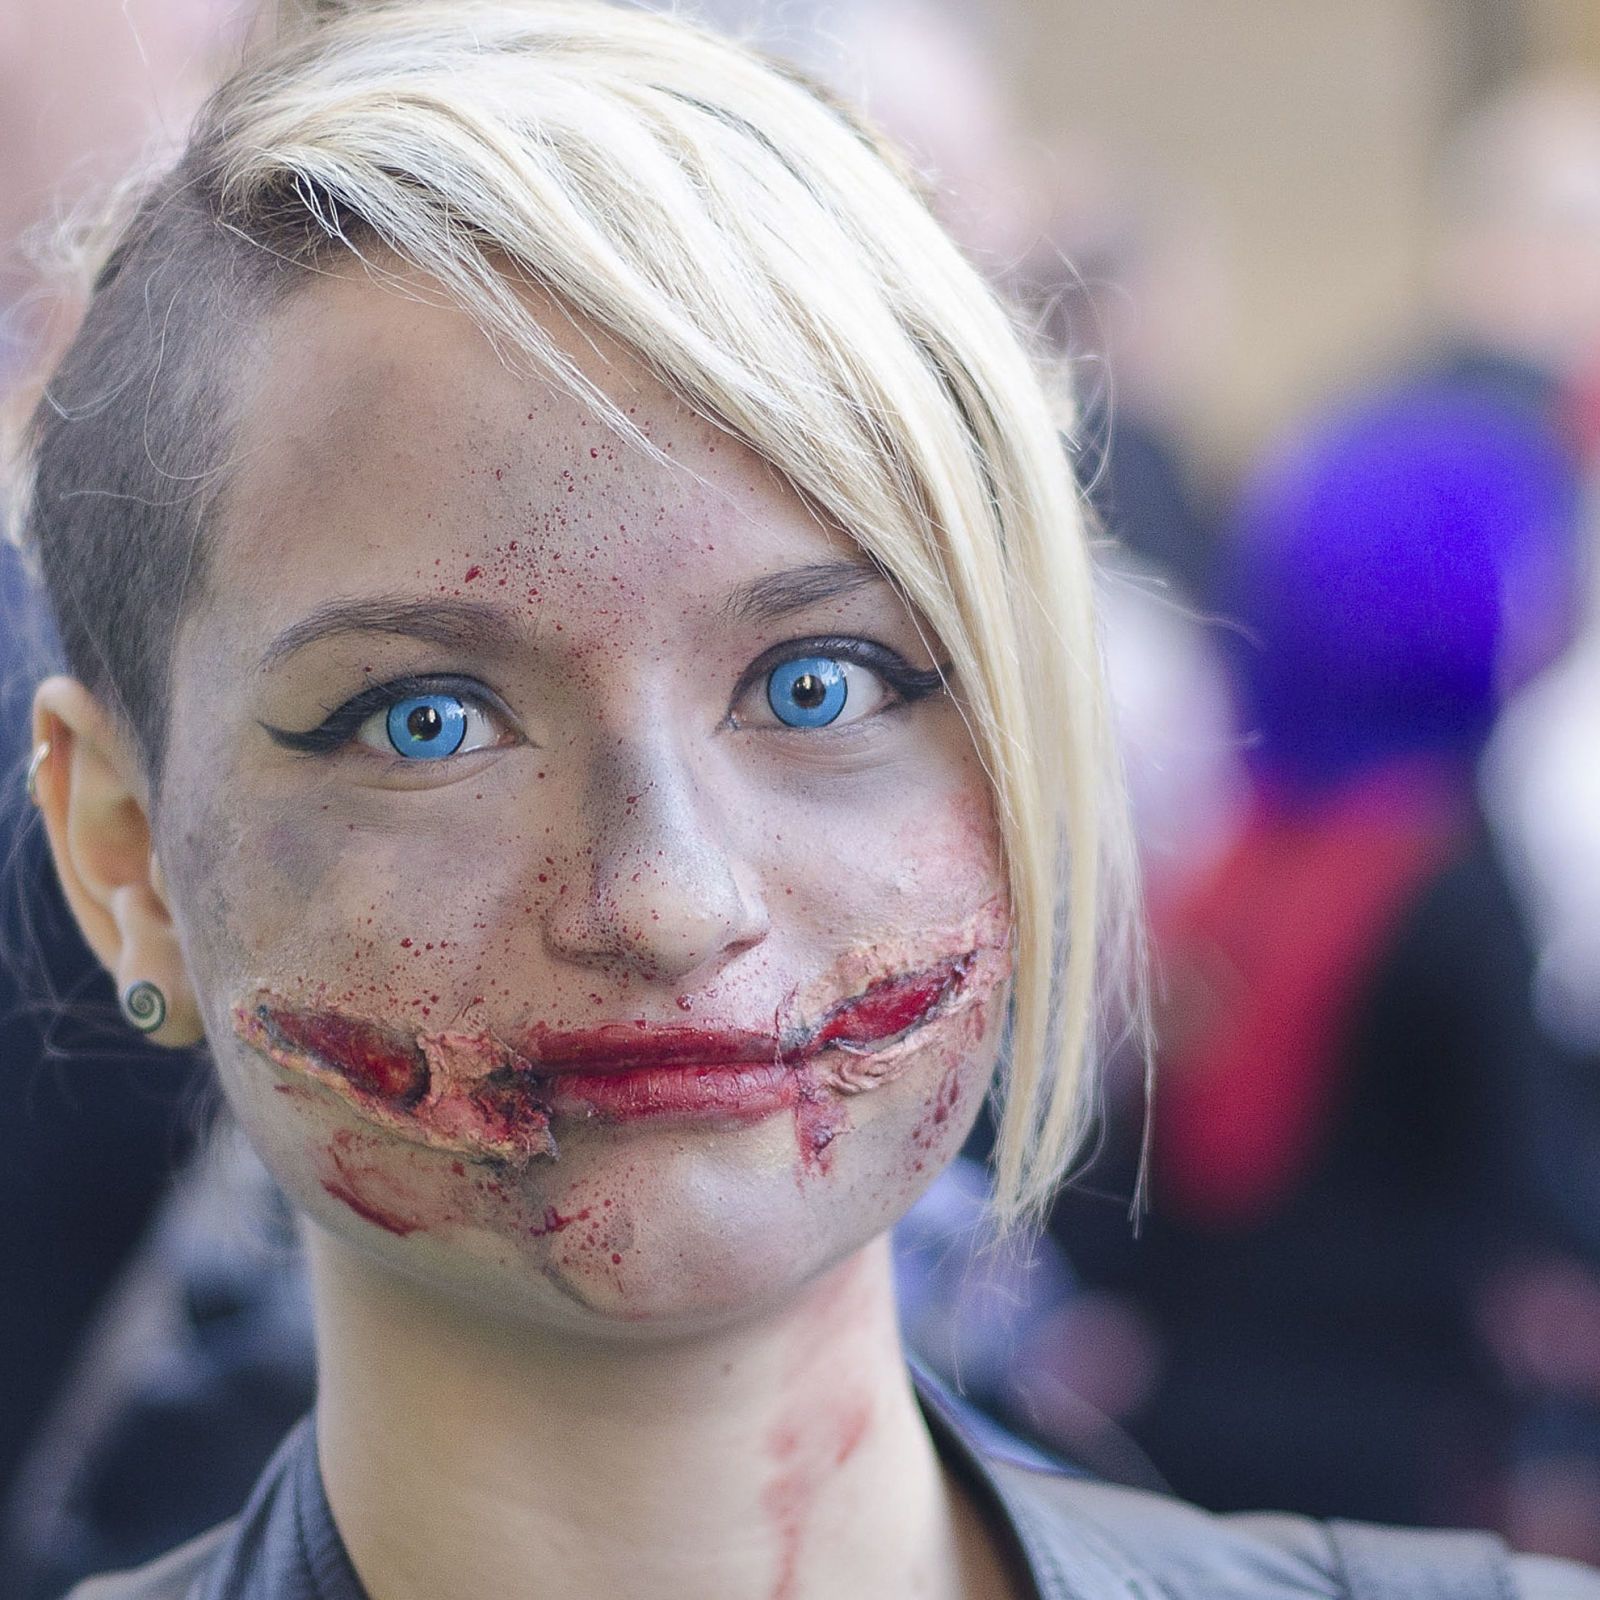 4 gruesome tips from film industry makeup artists